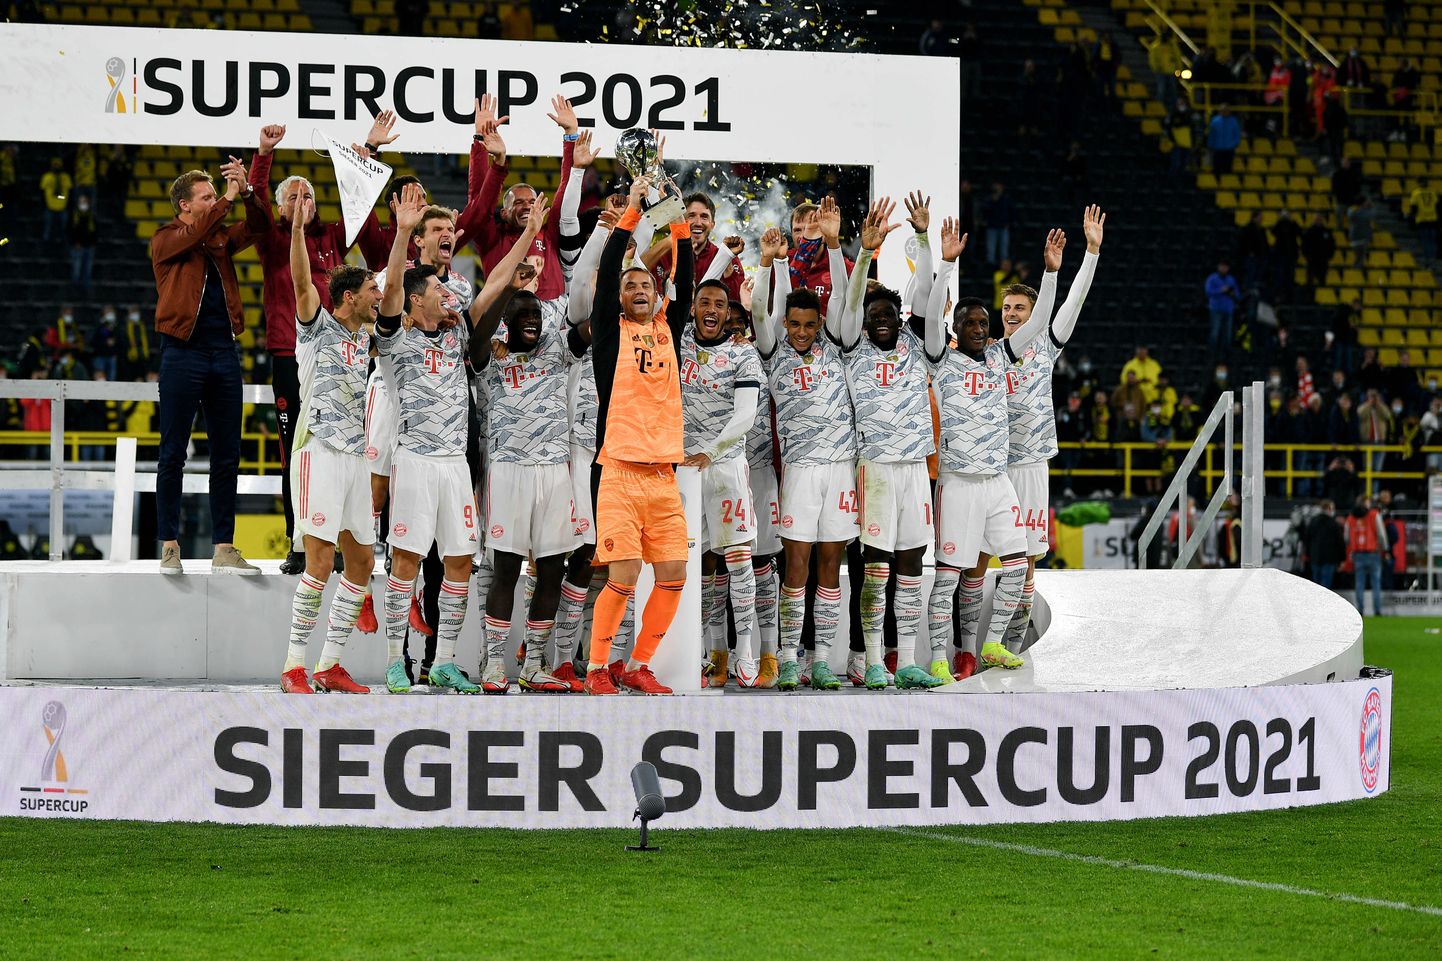 DORTMUND, Aug. 18, 2021  Members of Bayern Munich celebrate during the awarding ceremony after the German Supercup football match between Borussia Dortmund and FC Bayern Munich in Dortmund, Germany, Aug. 17, 2021. (Photo by Ulrich Hufnagel/Xinhua) (Credit Image: Â© Ulrich Hufnagel/Xinhua via ZUMA Press)